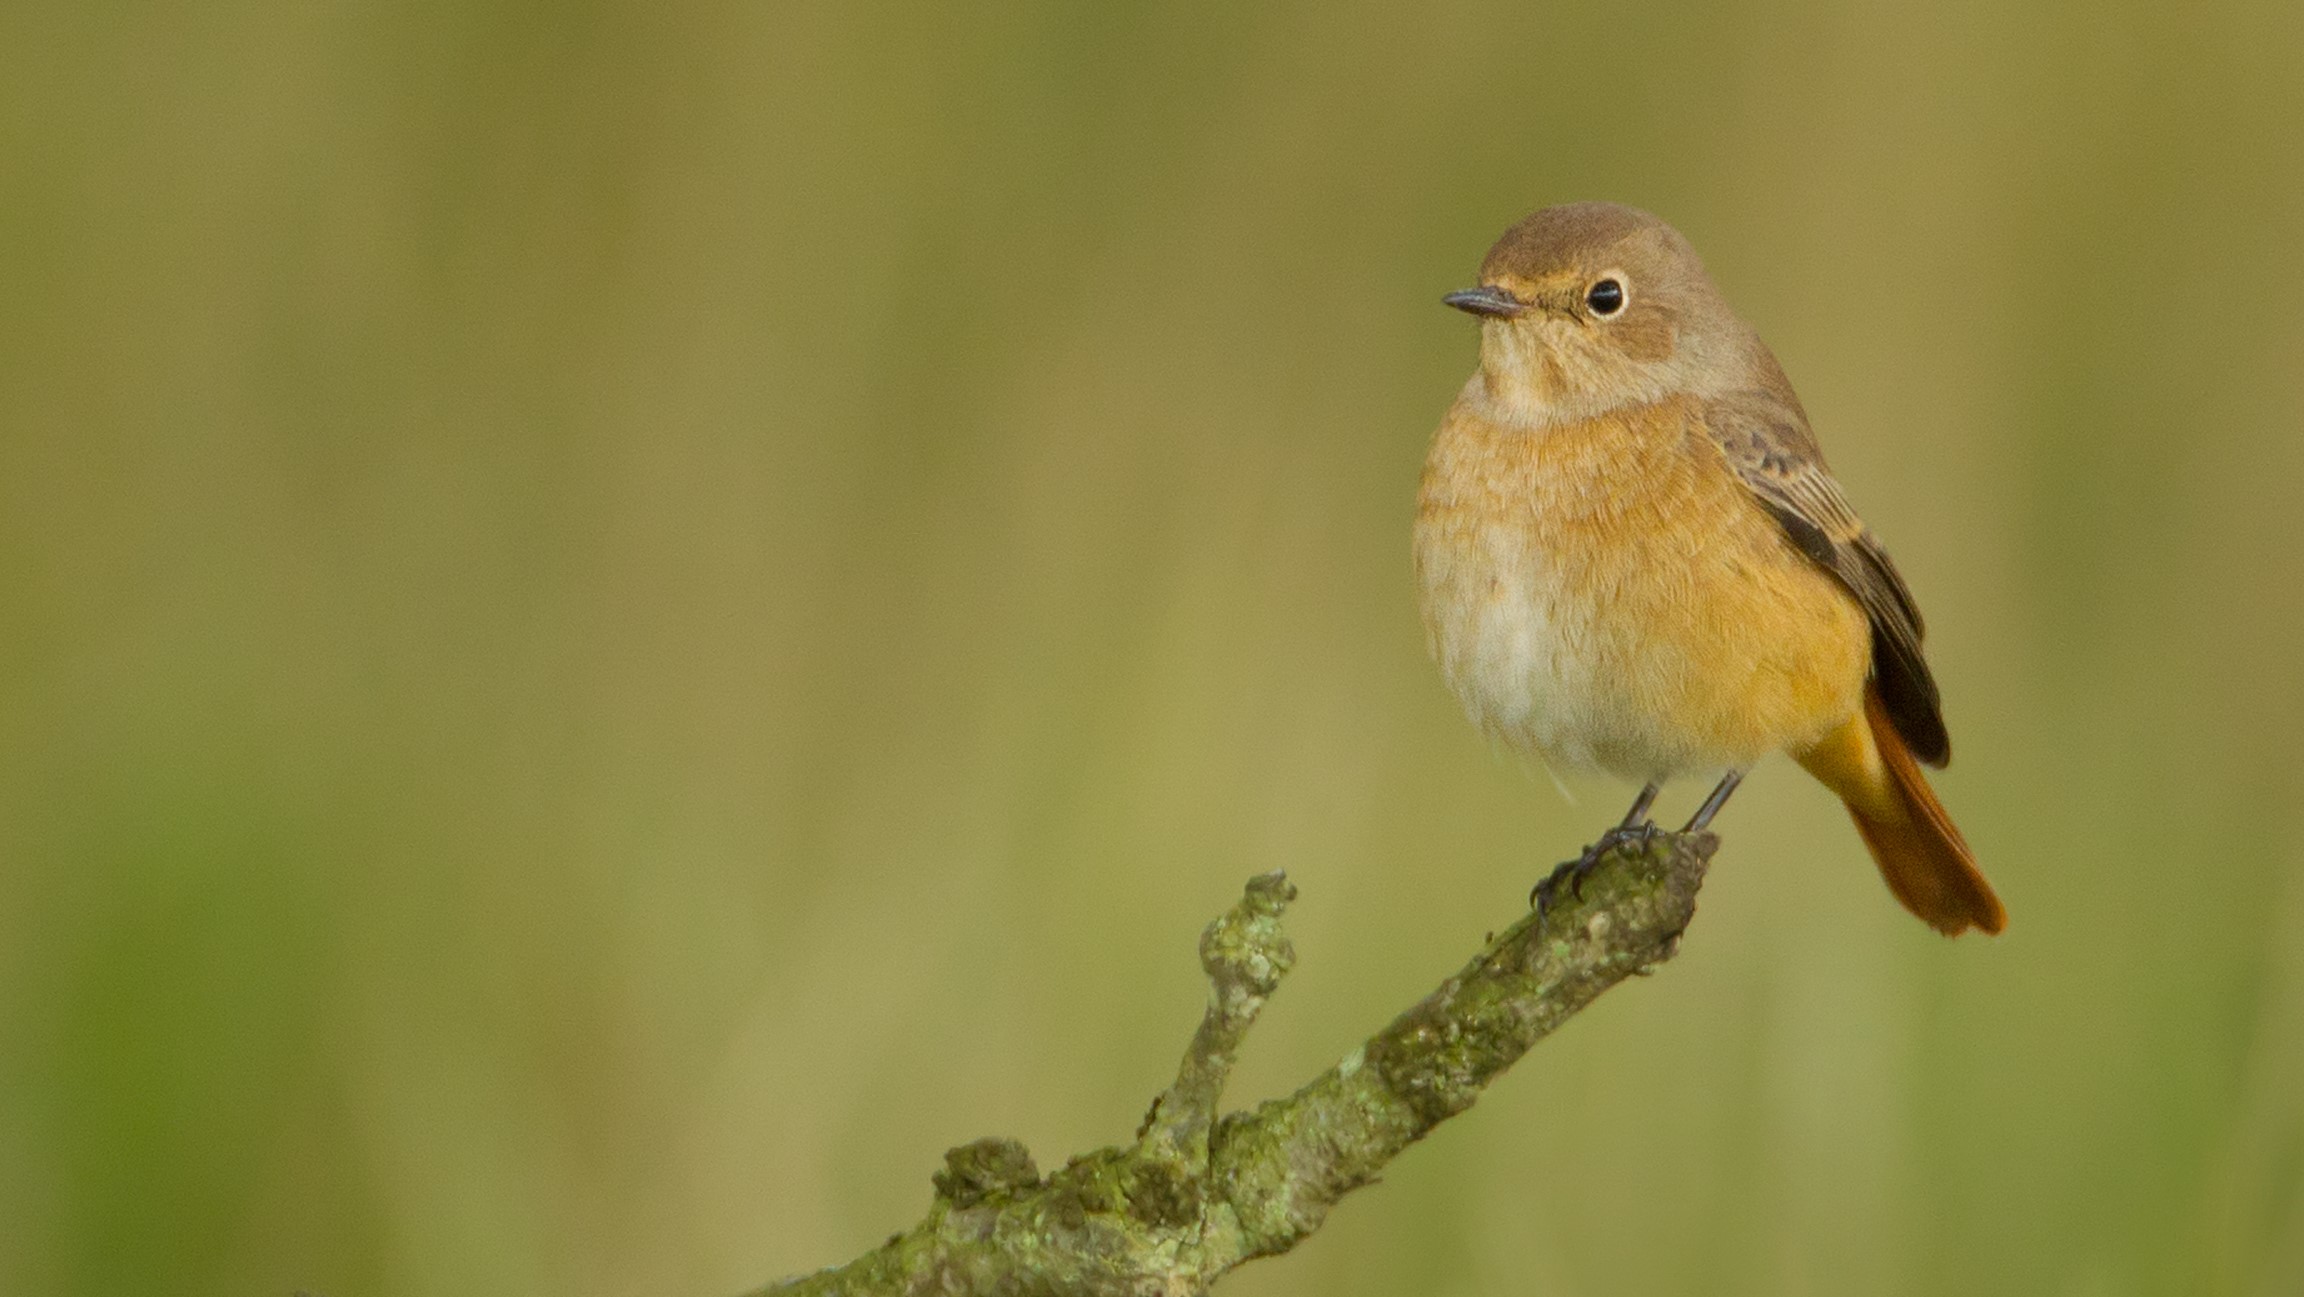 A female Redstart perching on a small branch.